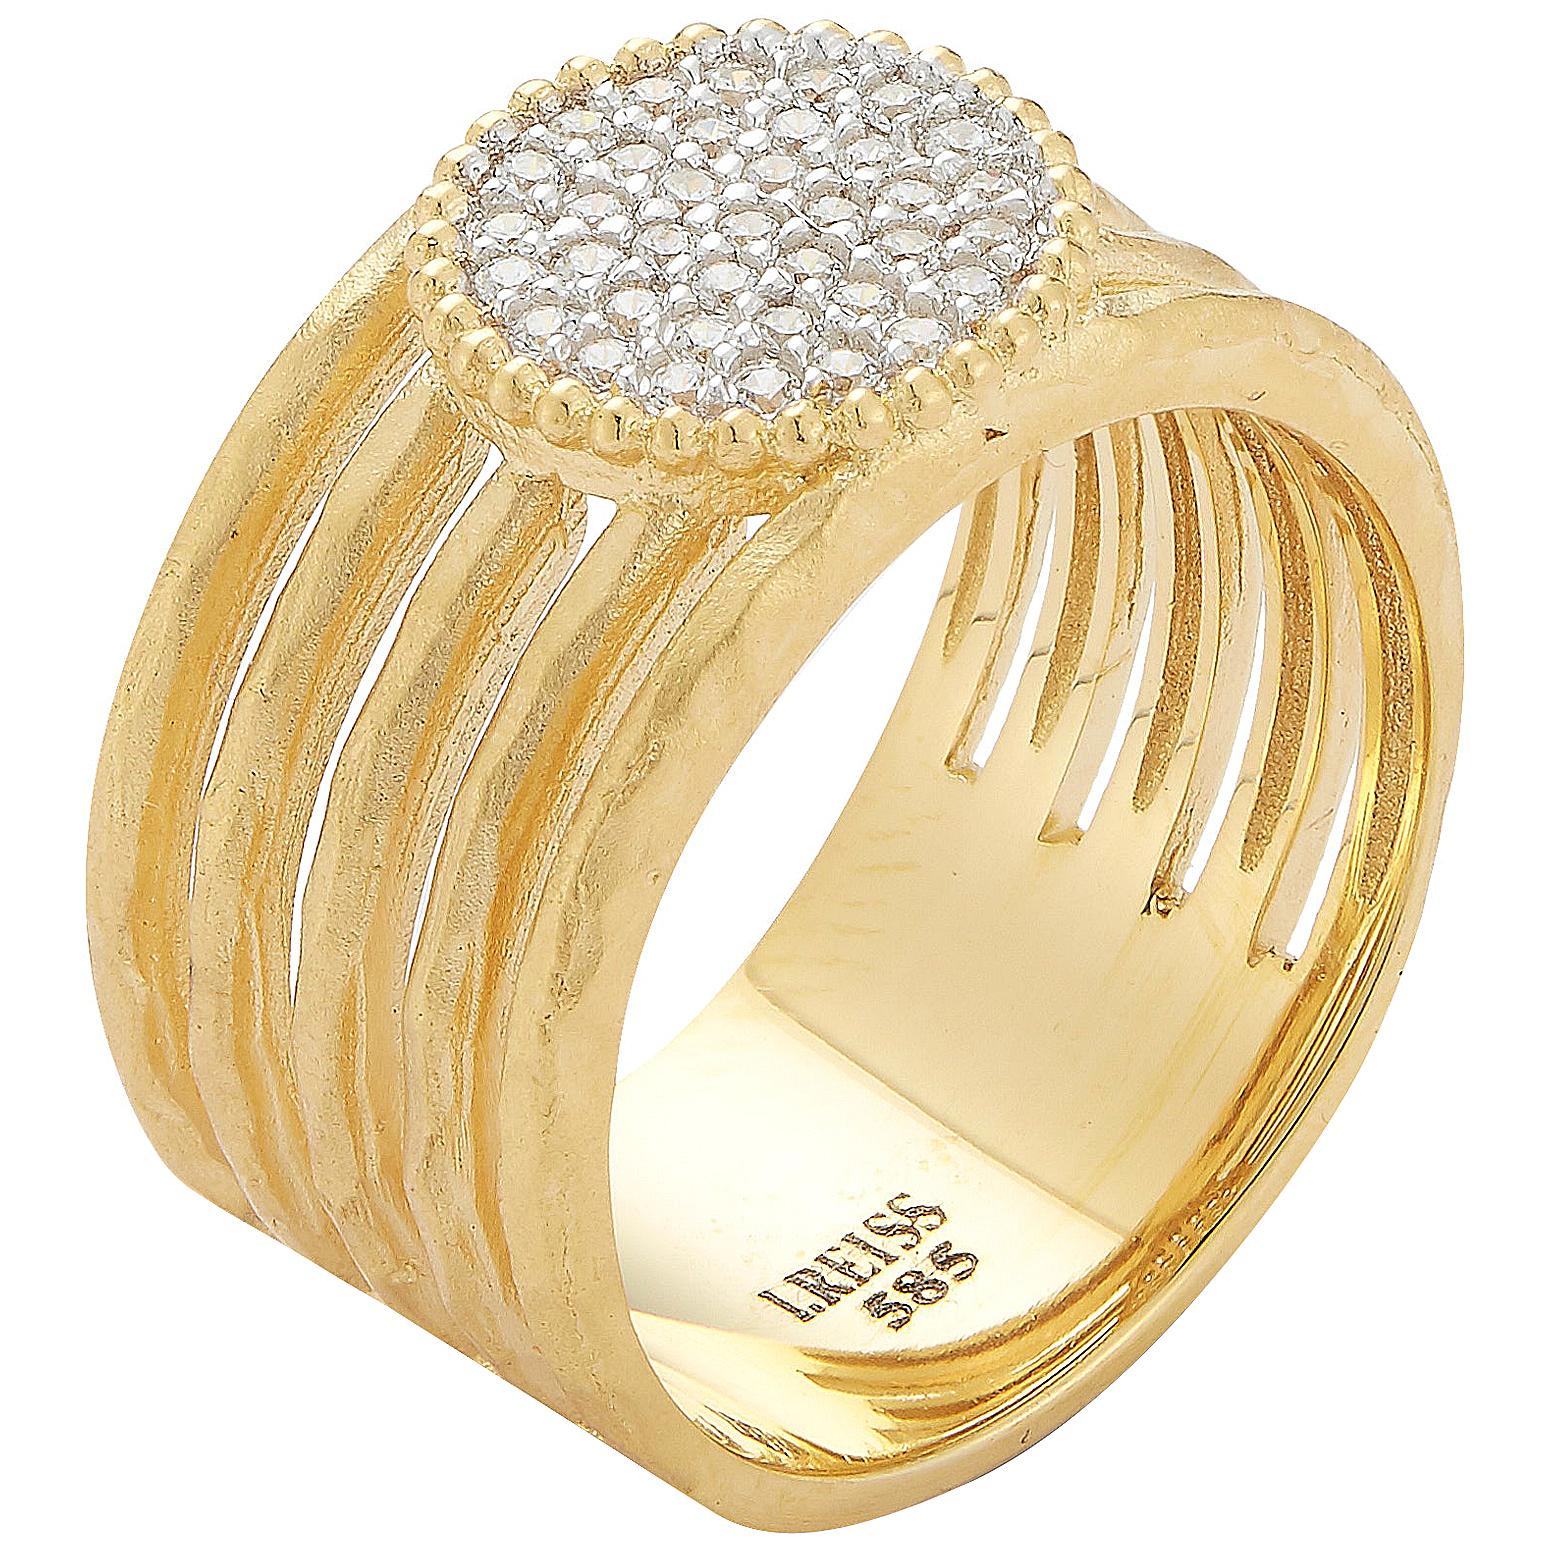 Handcrafted 14 Karat Yellow Gold Cut-Out Ring with a Pave Oval Motif